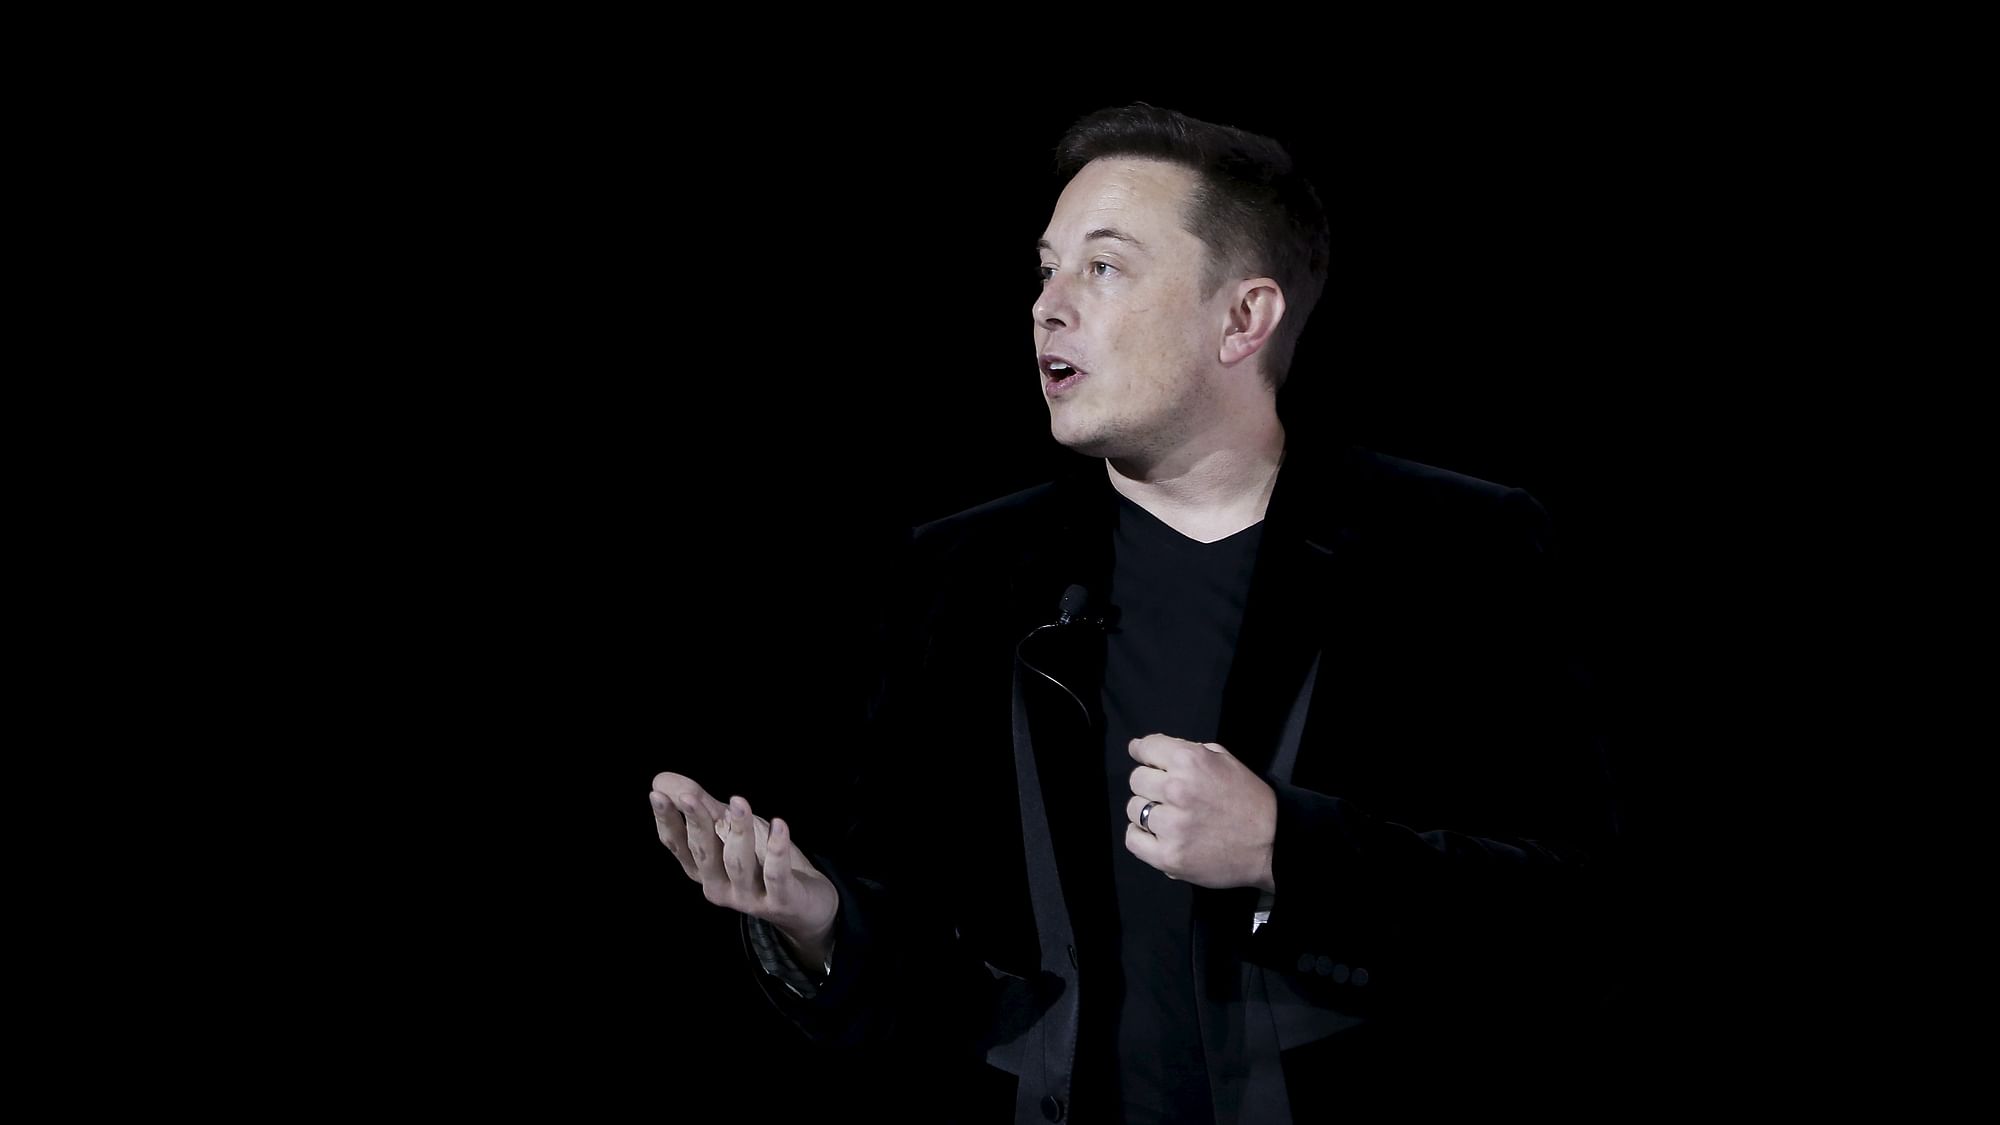 Musk had earlier warned of the harm that may come from artificial intelligence calling it humanity’s “biggest existential threat”. (Photo: Reuters)